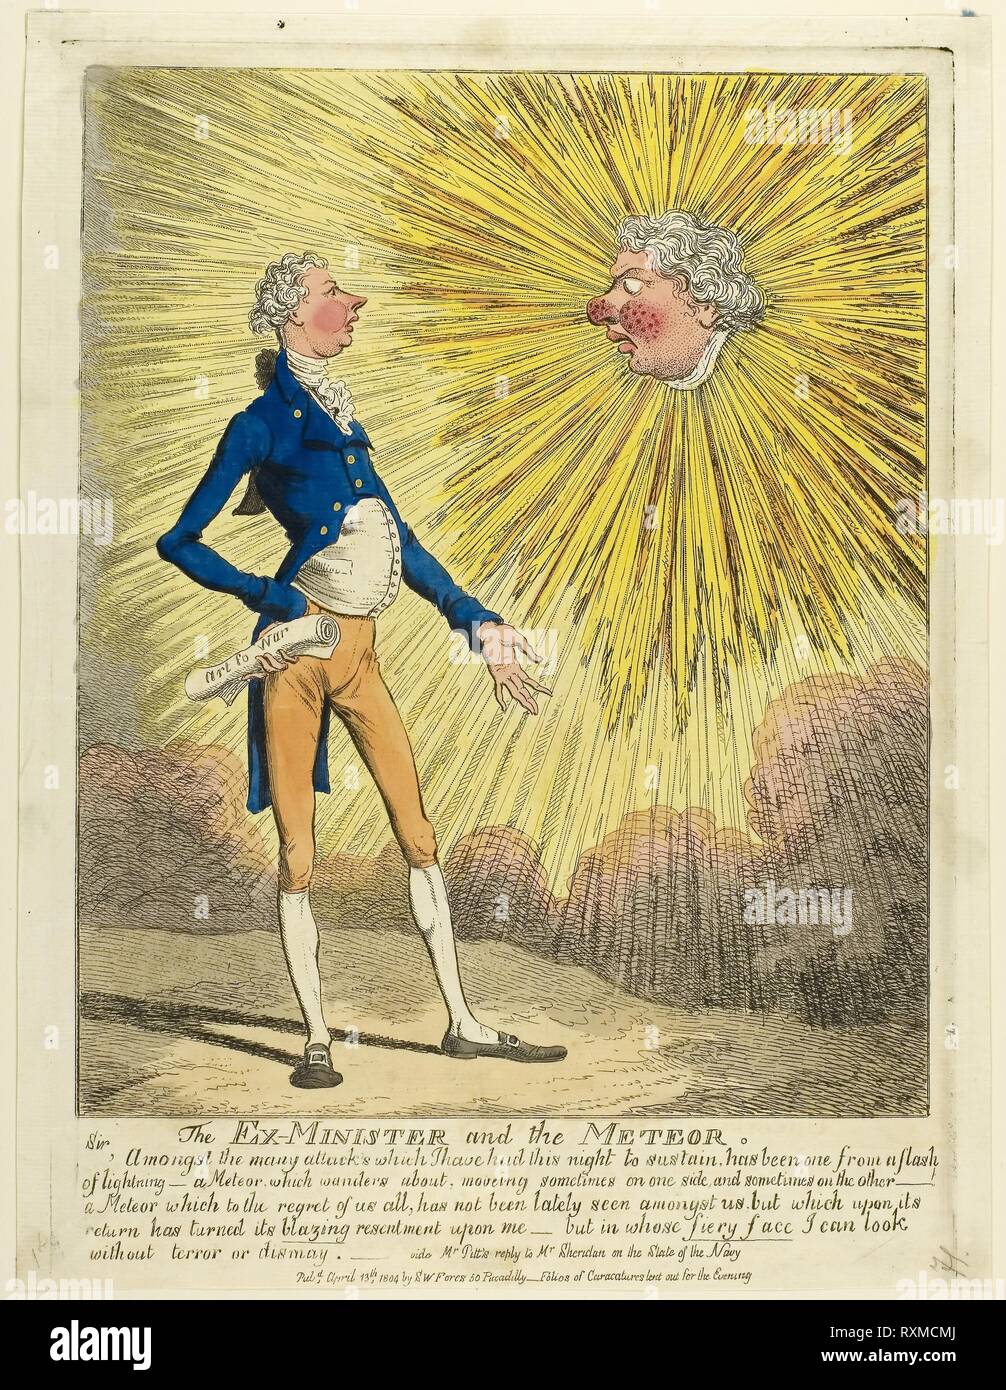 The Ex-Minister and the Meteor. Charles WIlliams (English, active 1797-1830); published by S. W. Fores (English, active 1785-1825). Date: 1804. Dimensions: 288 × 240 mm (image); 343 × 250 mm (plate); 353 × 267 mm (sheet). Hand-colored etching on ivory laid paper. Origin: England. Museum: The Chicago Art Institute. Stock Photo